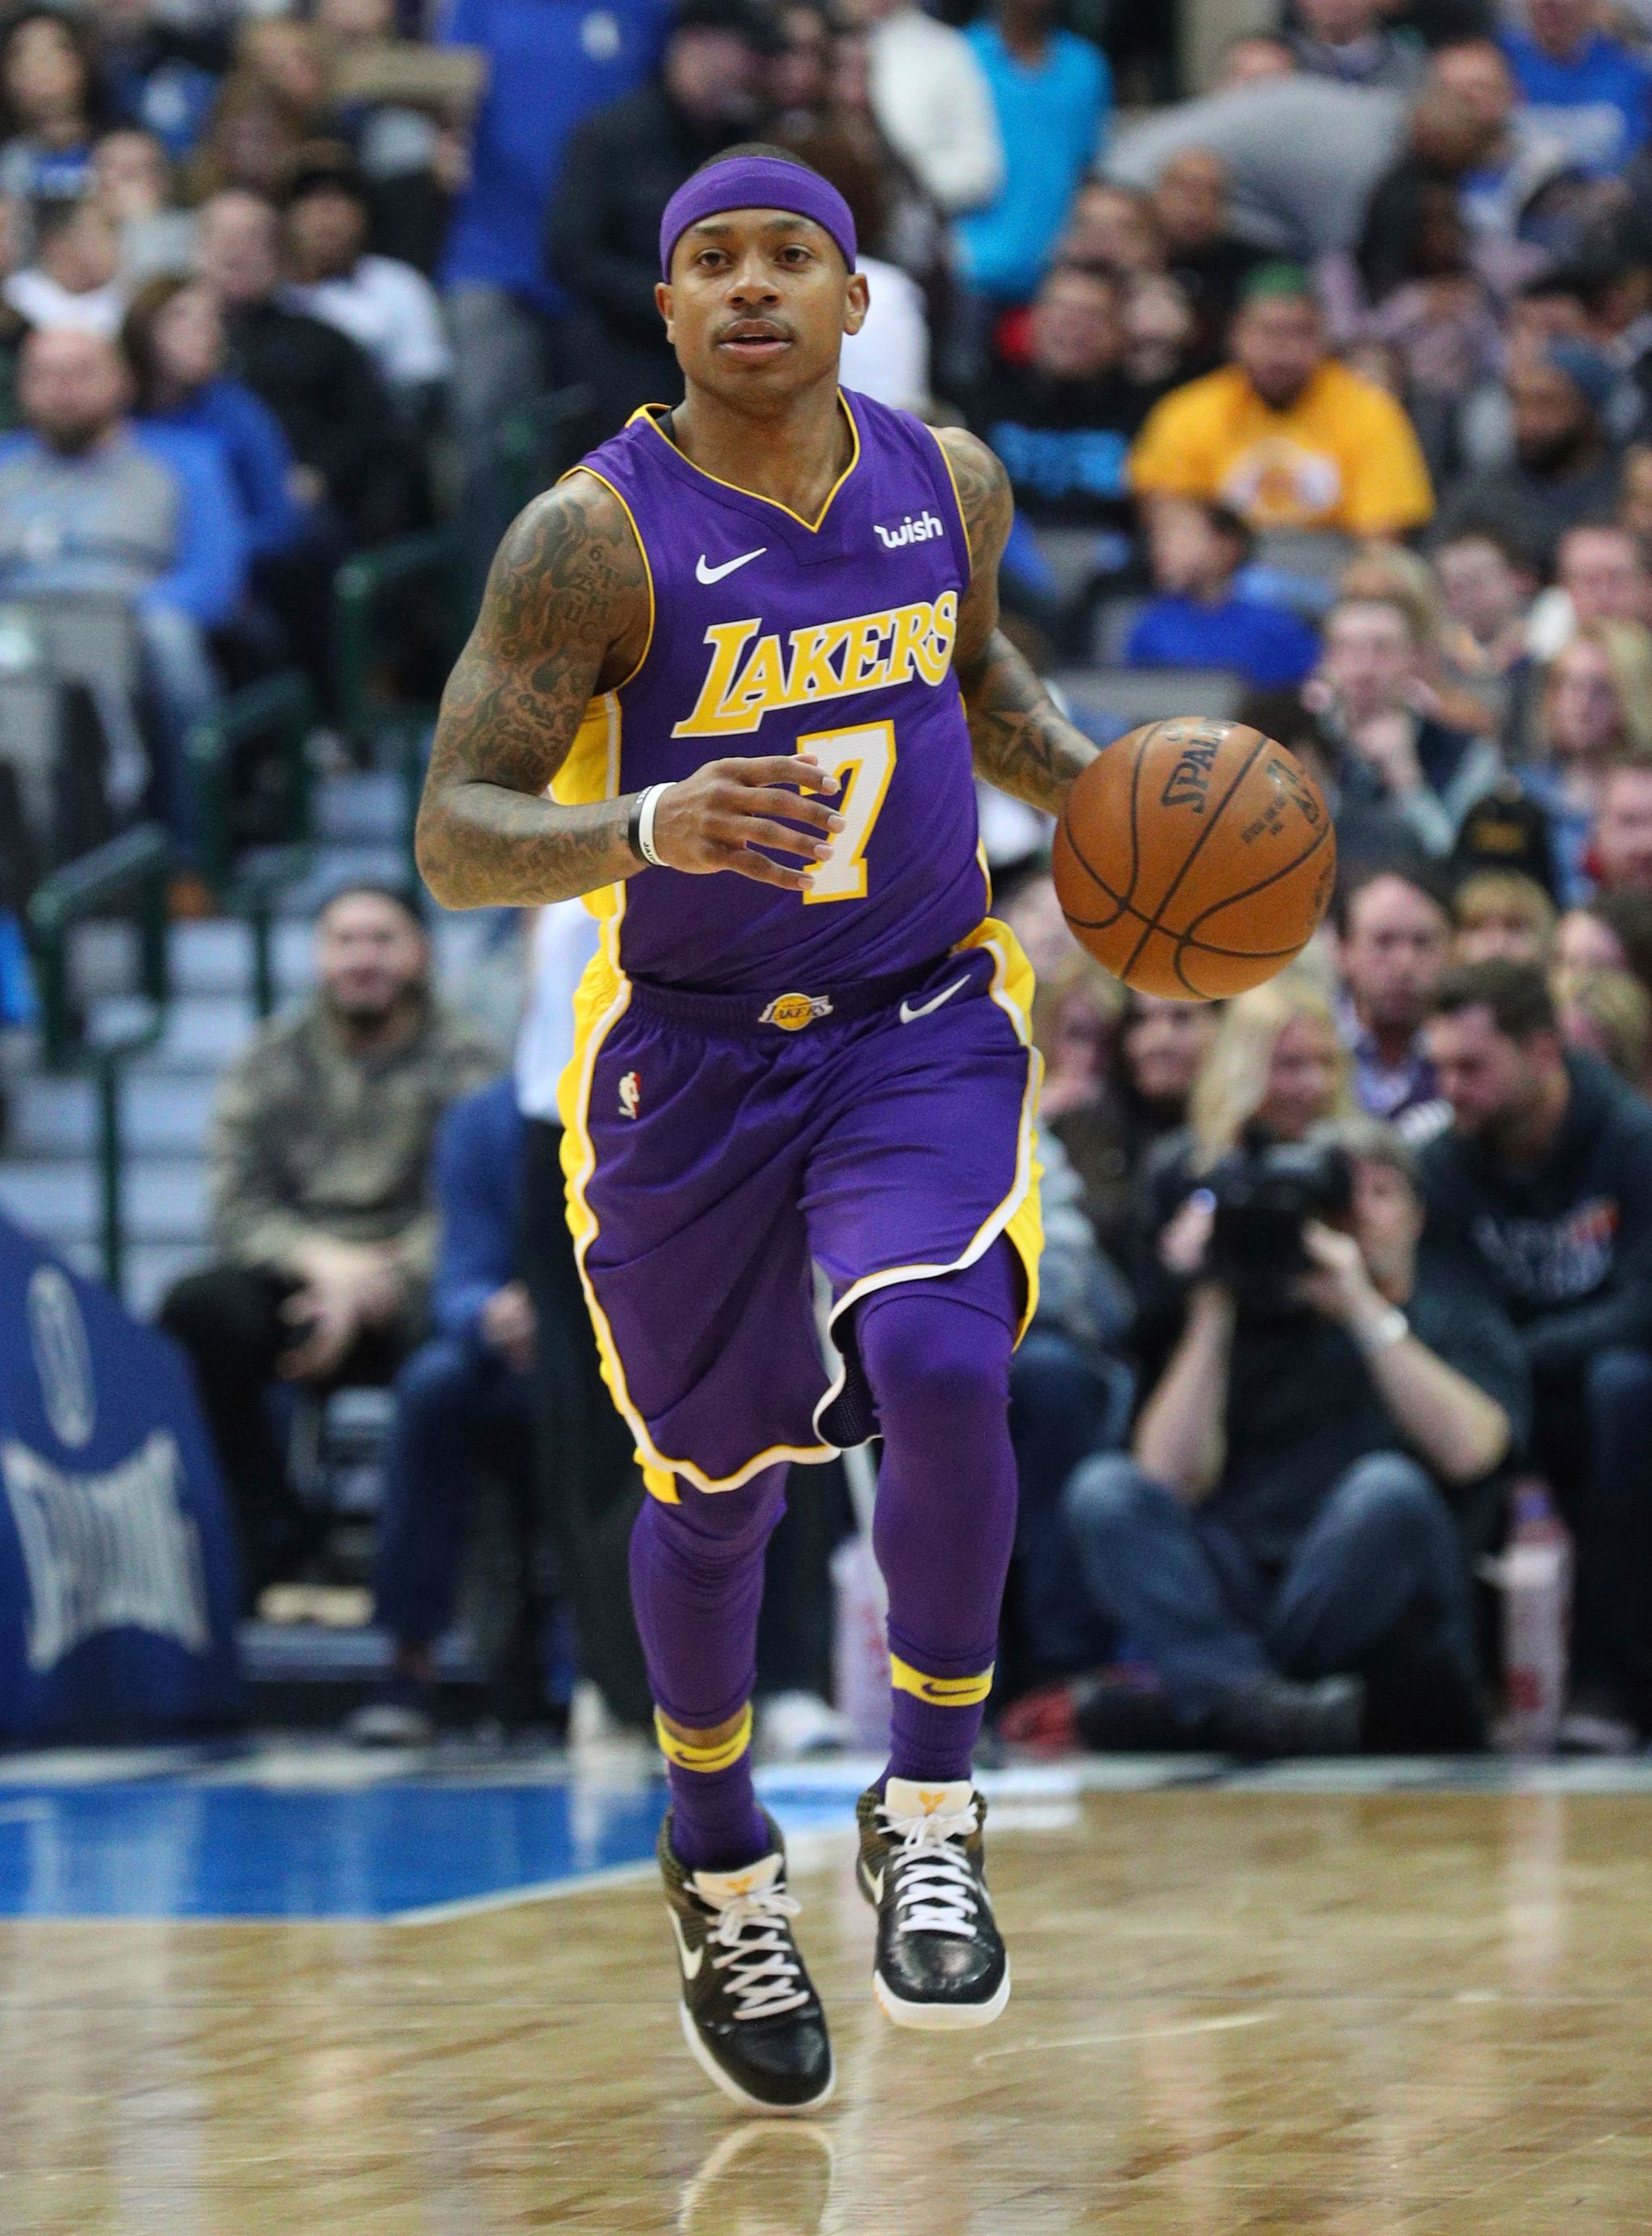 Here's how Isaiah Thomas did in his Lakers debut